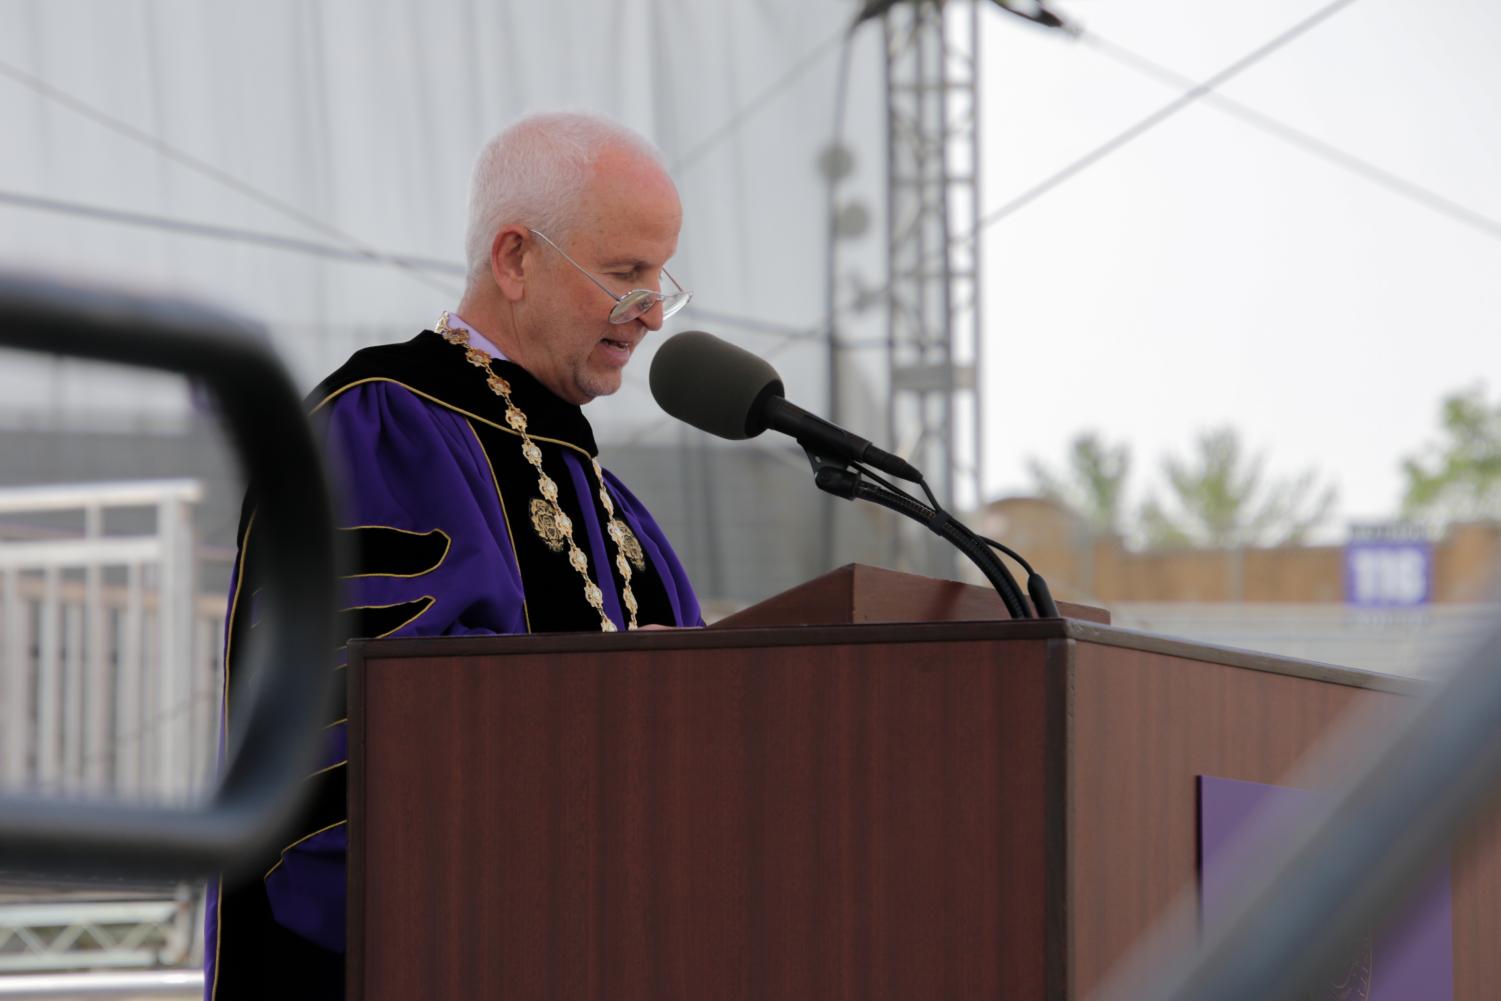 A person in a purple gown gives a speech in front of a microphone on a brown podium.